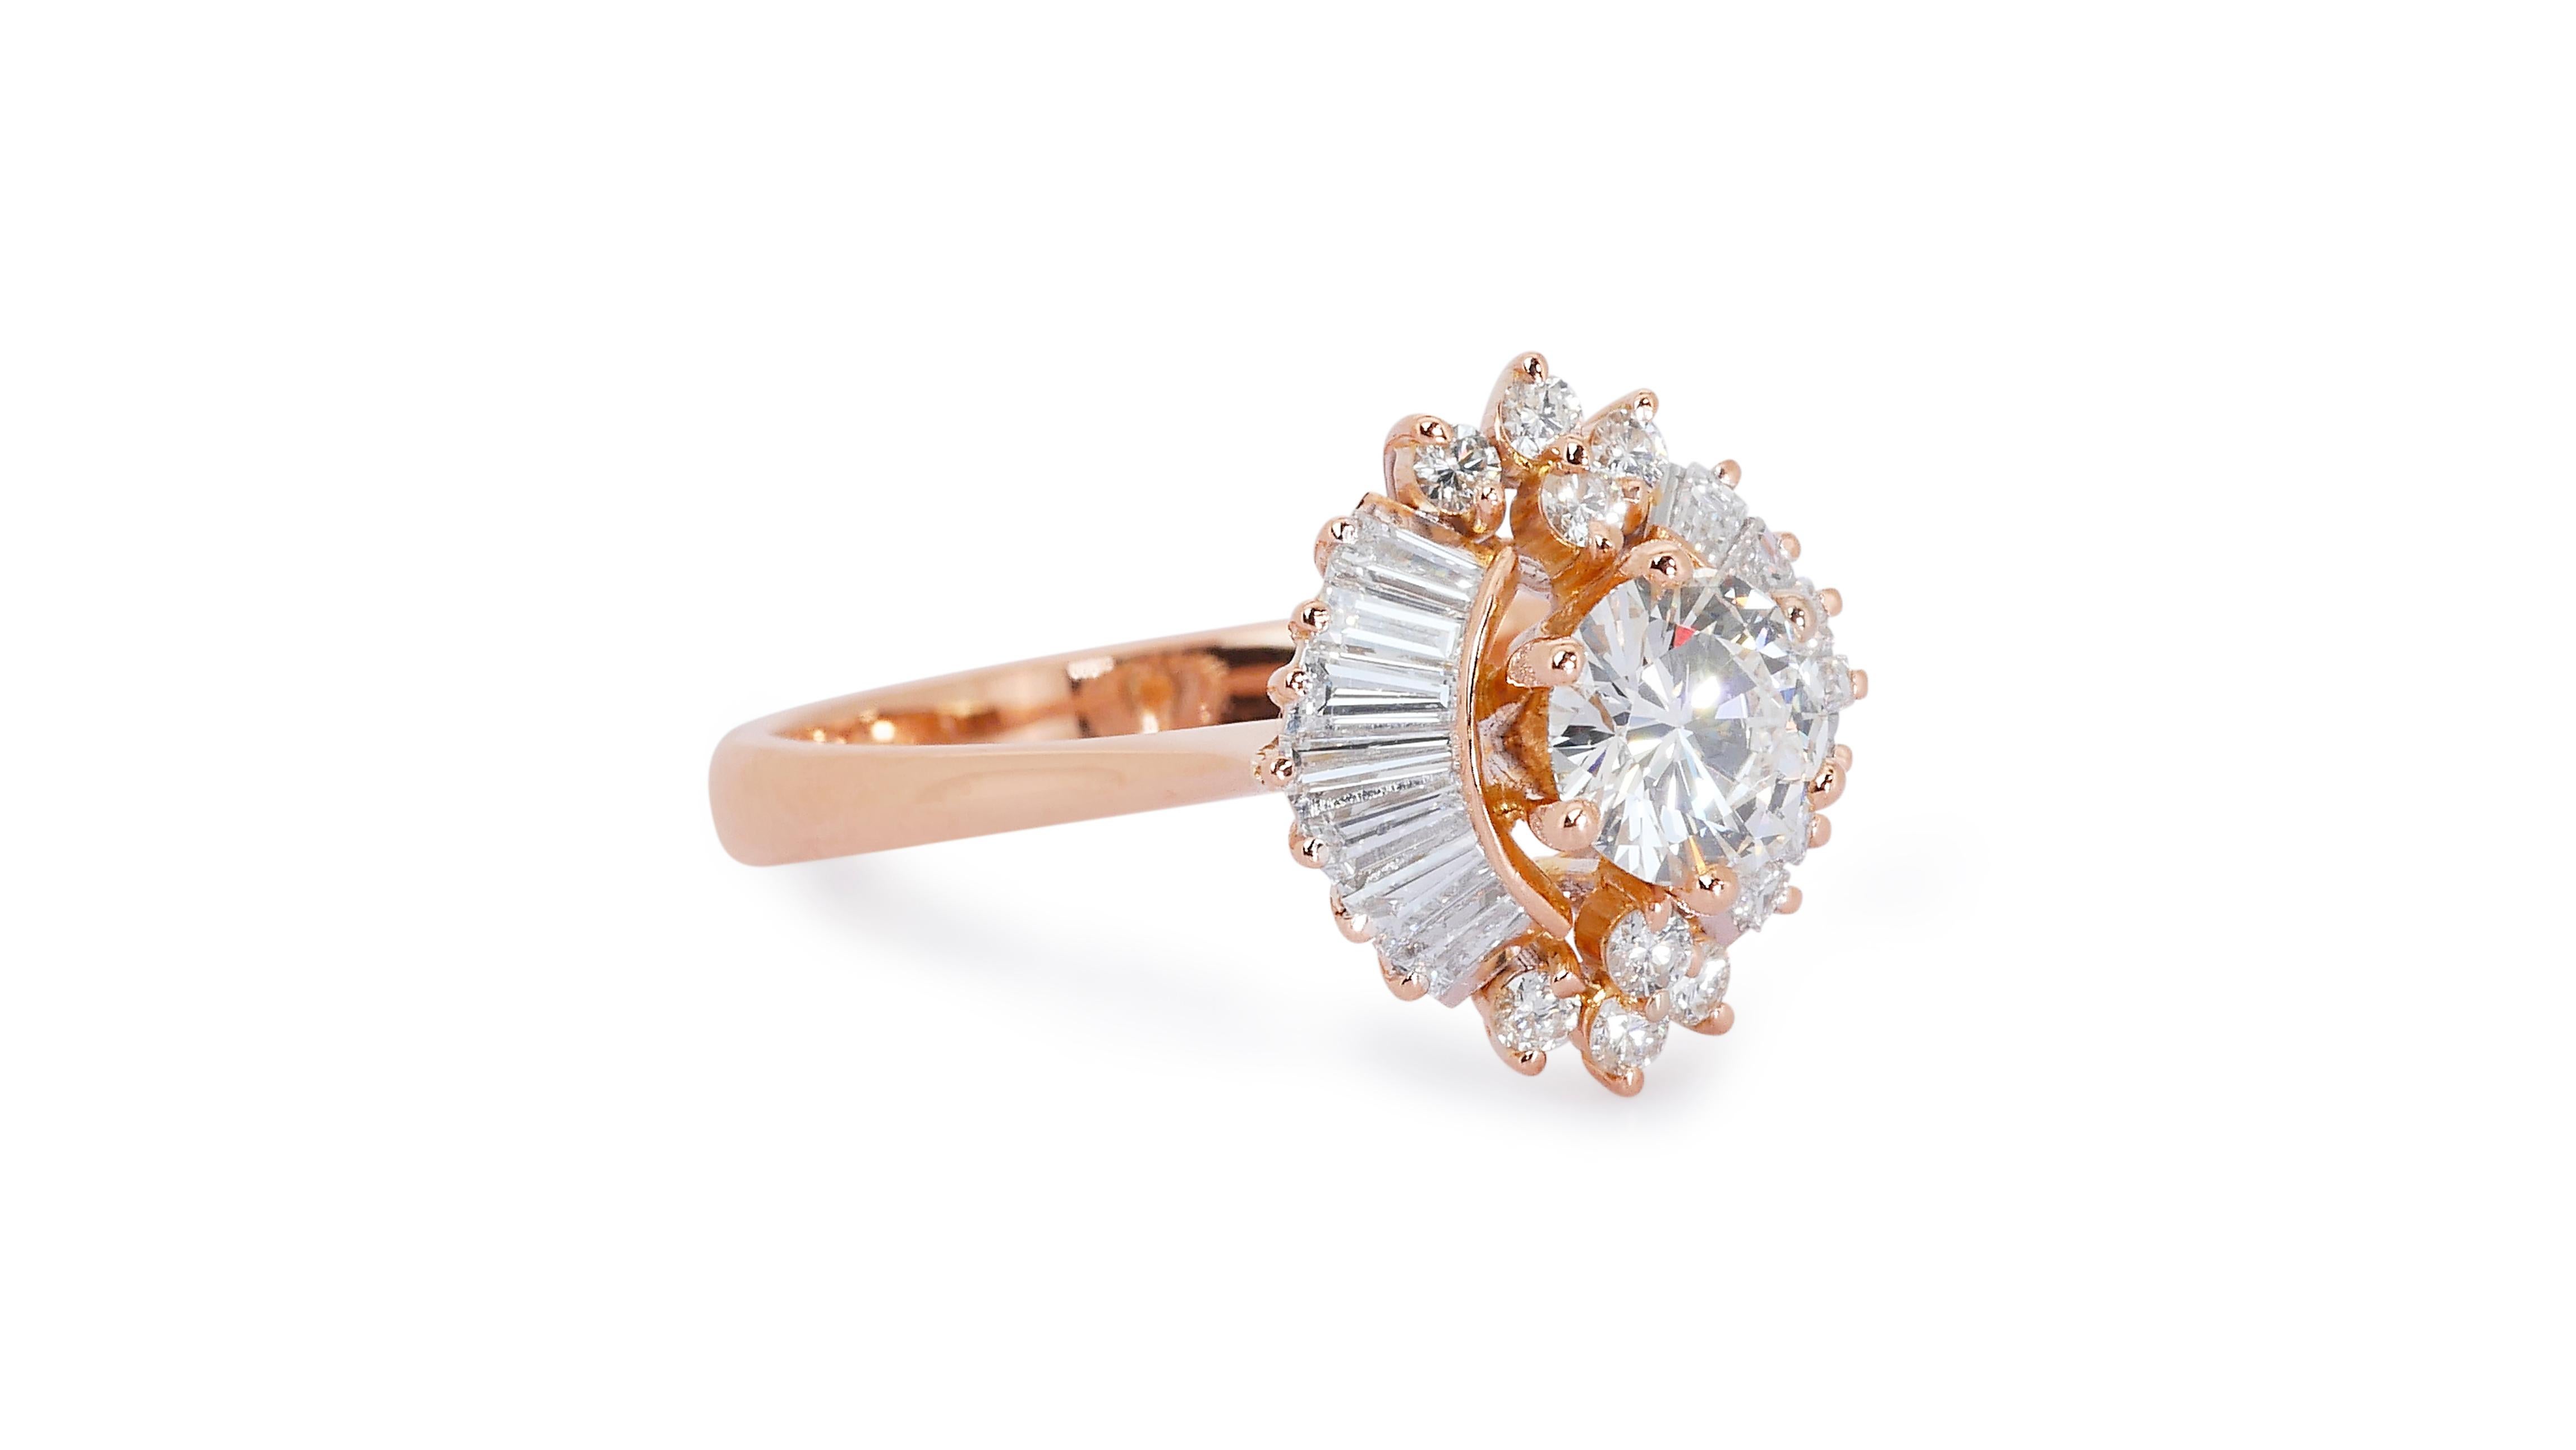 Women's Marvelous 14k Rose Gold Ring w/ 1.46 Carat Natural Diamonds GIA Certificate For Sale